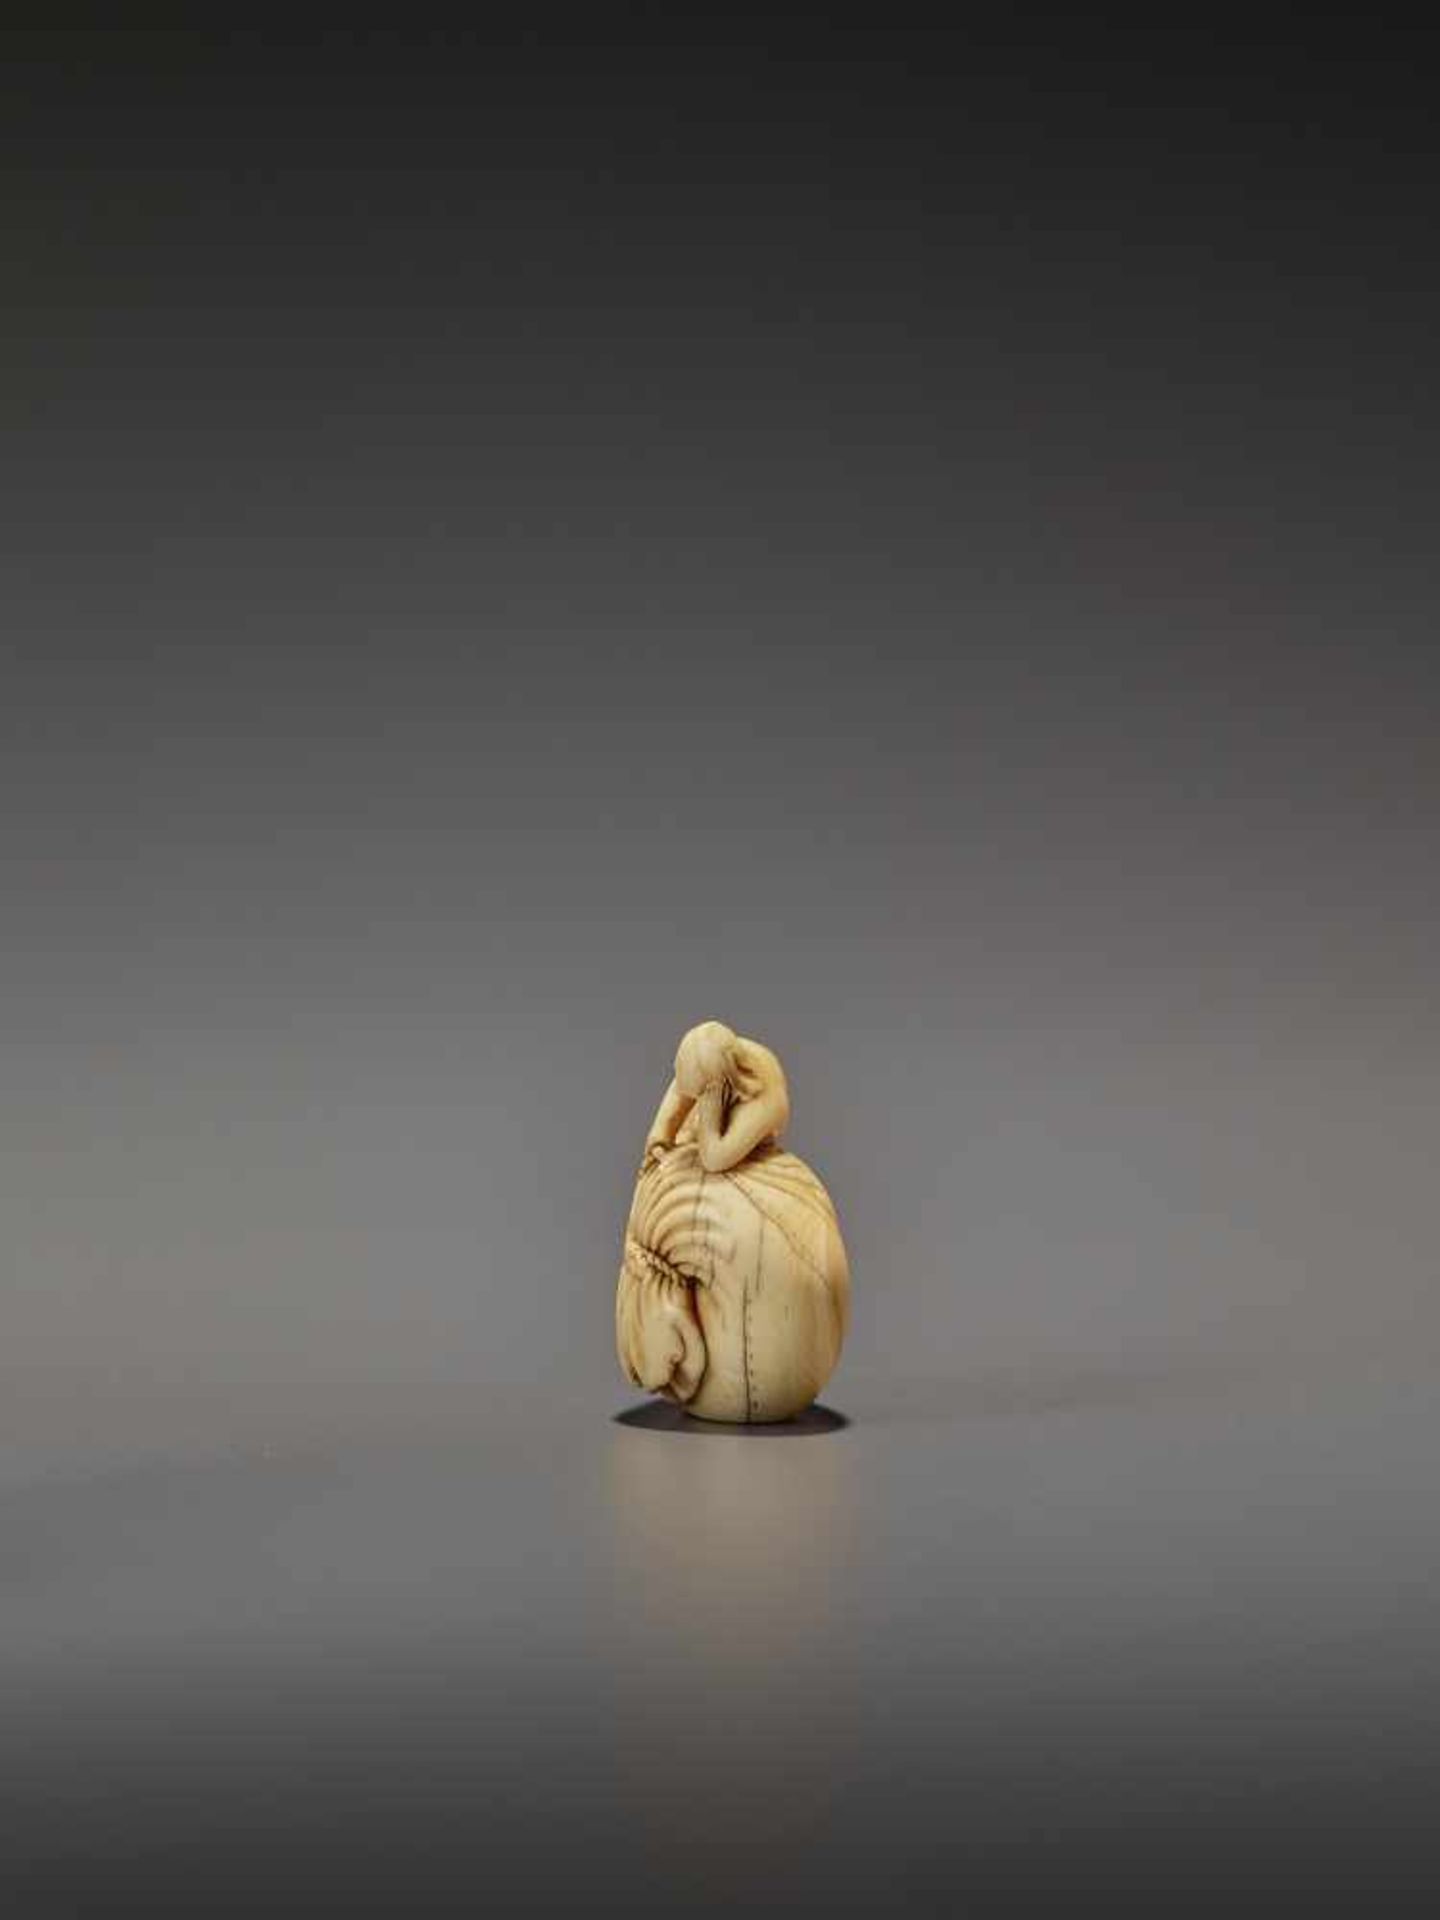 AN EARLY IVORY NETSUKE OF A NAKED MAN SLEEPING ON A BAG UnsignedJapan, mid-18th century, Edo - Image 4 of 8